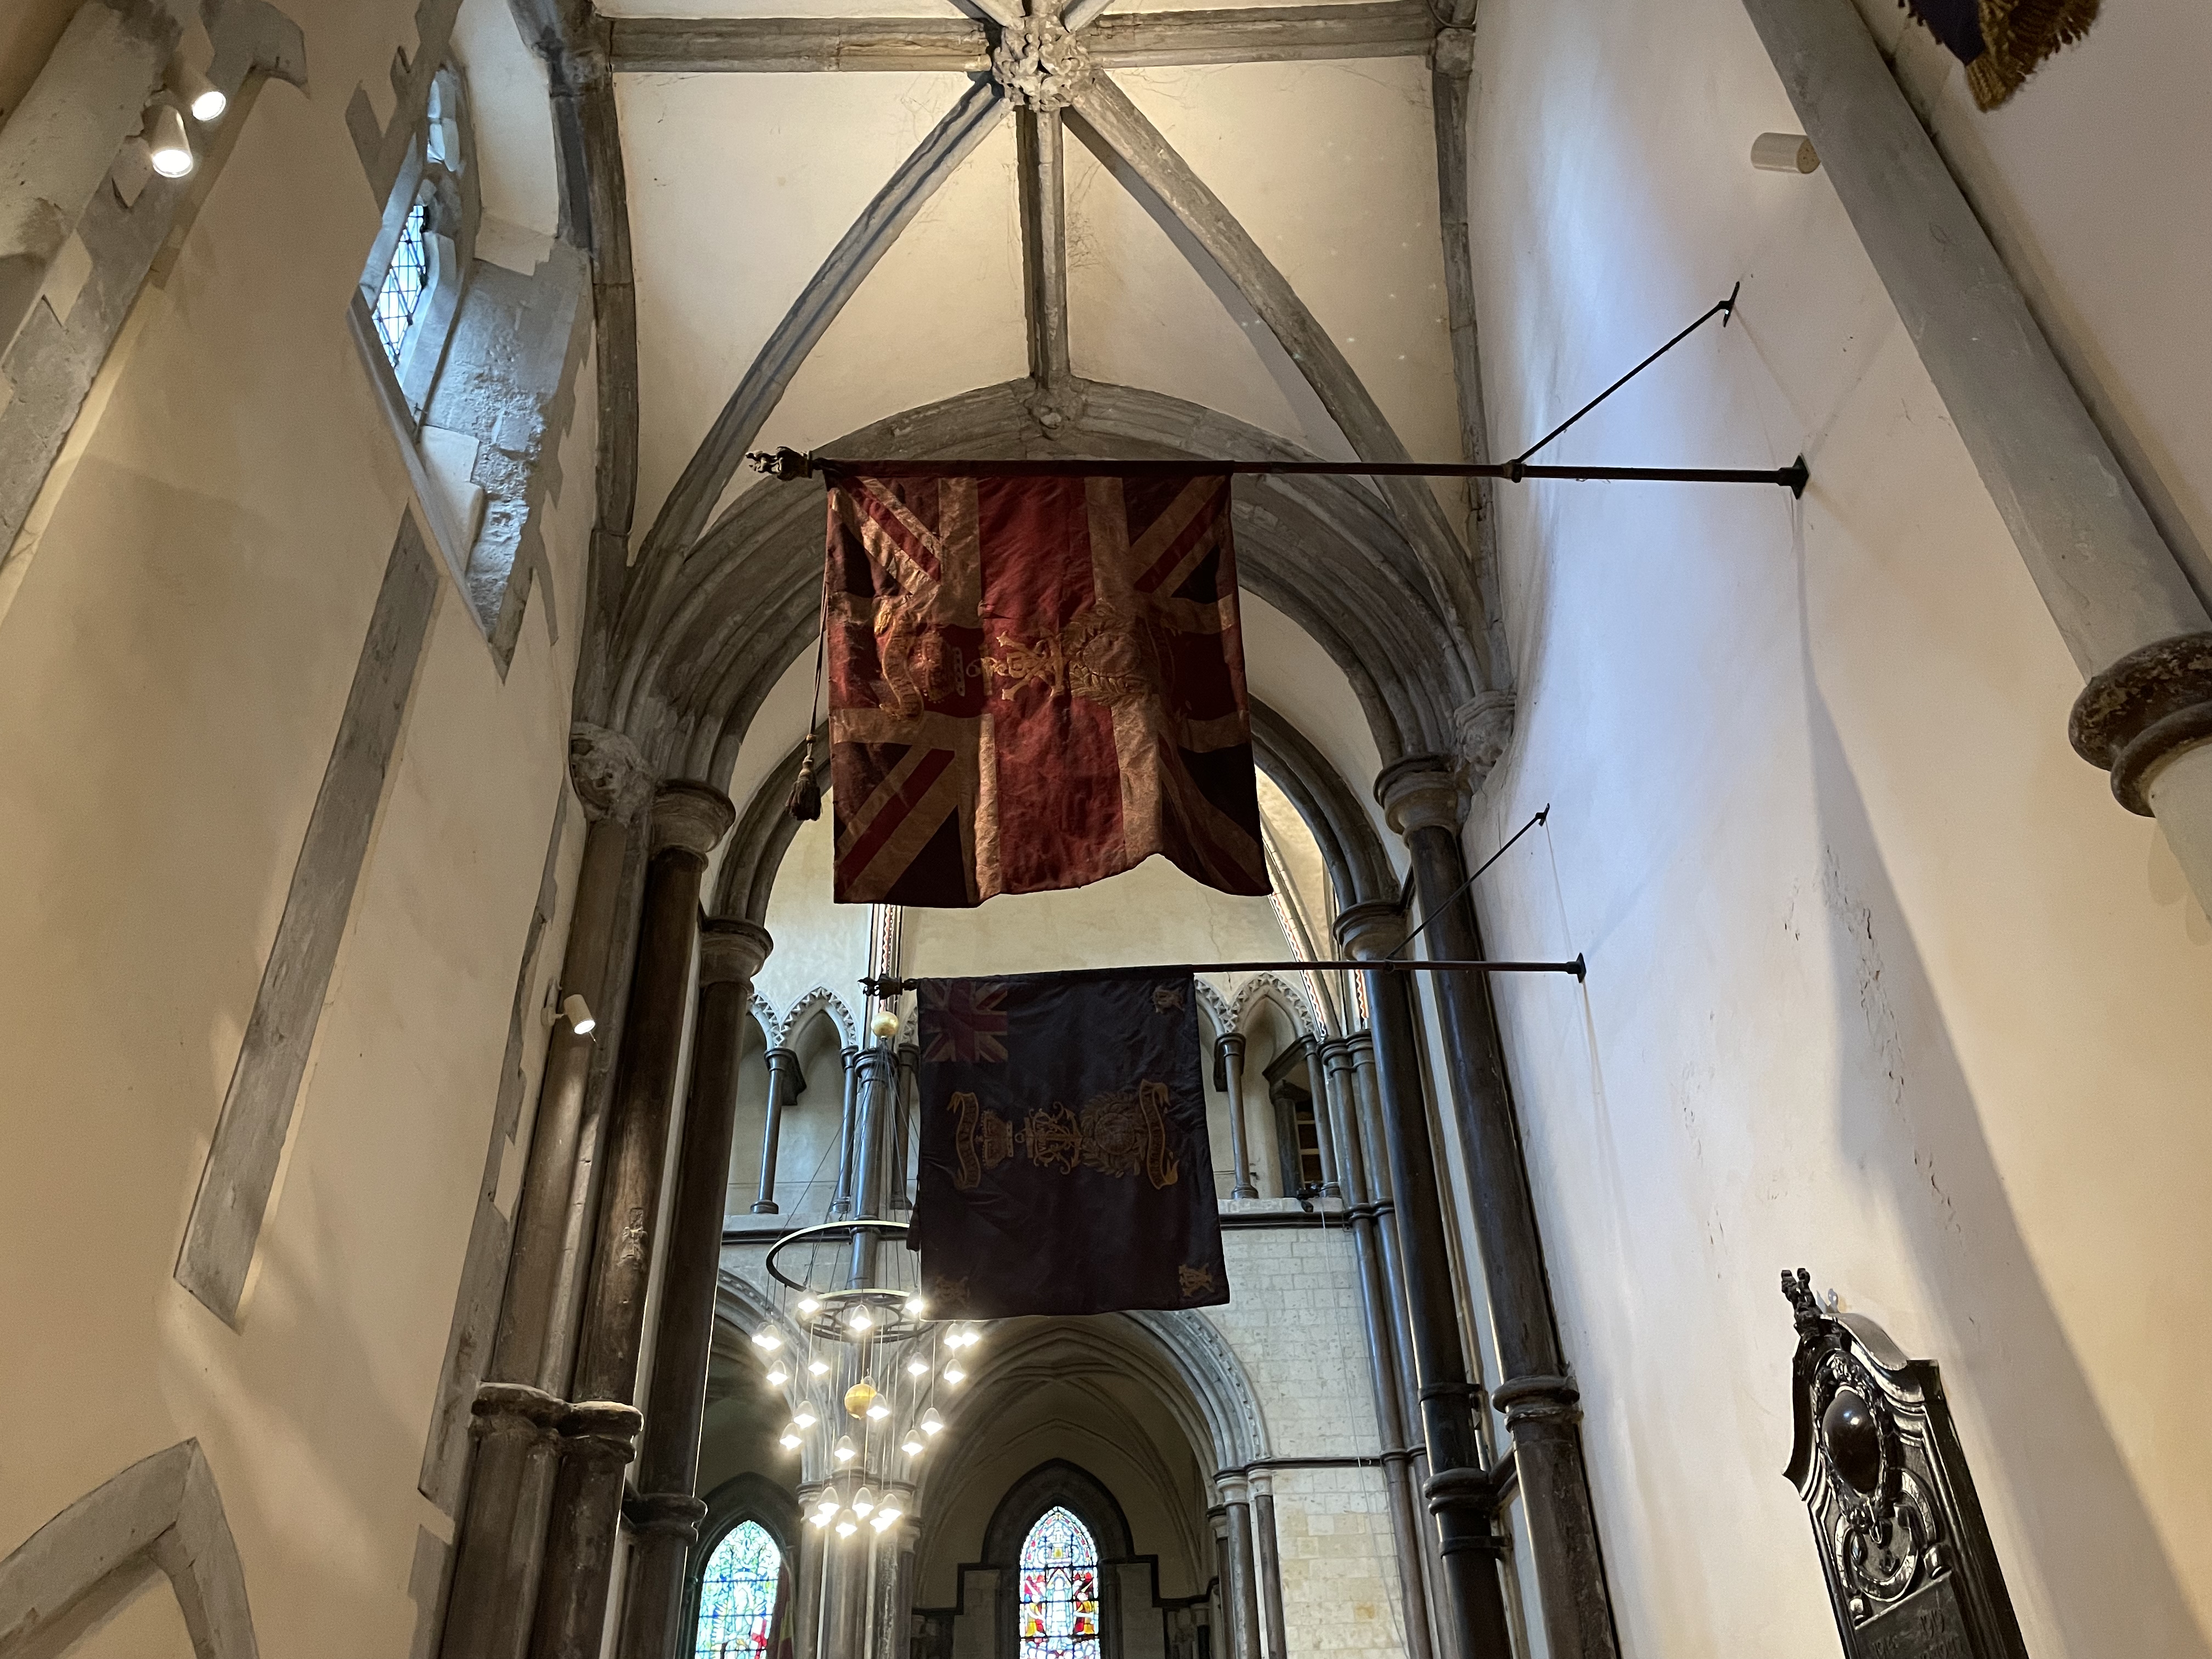 Photograph of the military colours and standards hanging in the north quire aisle.